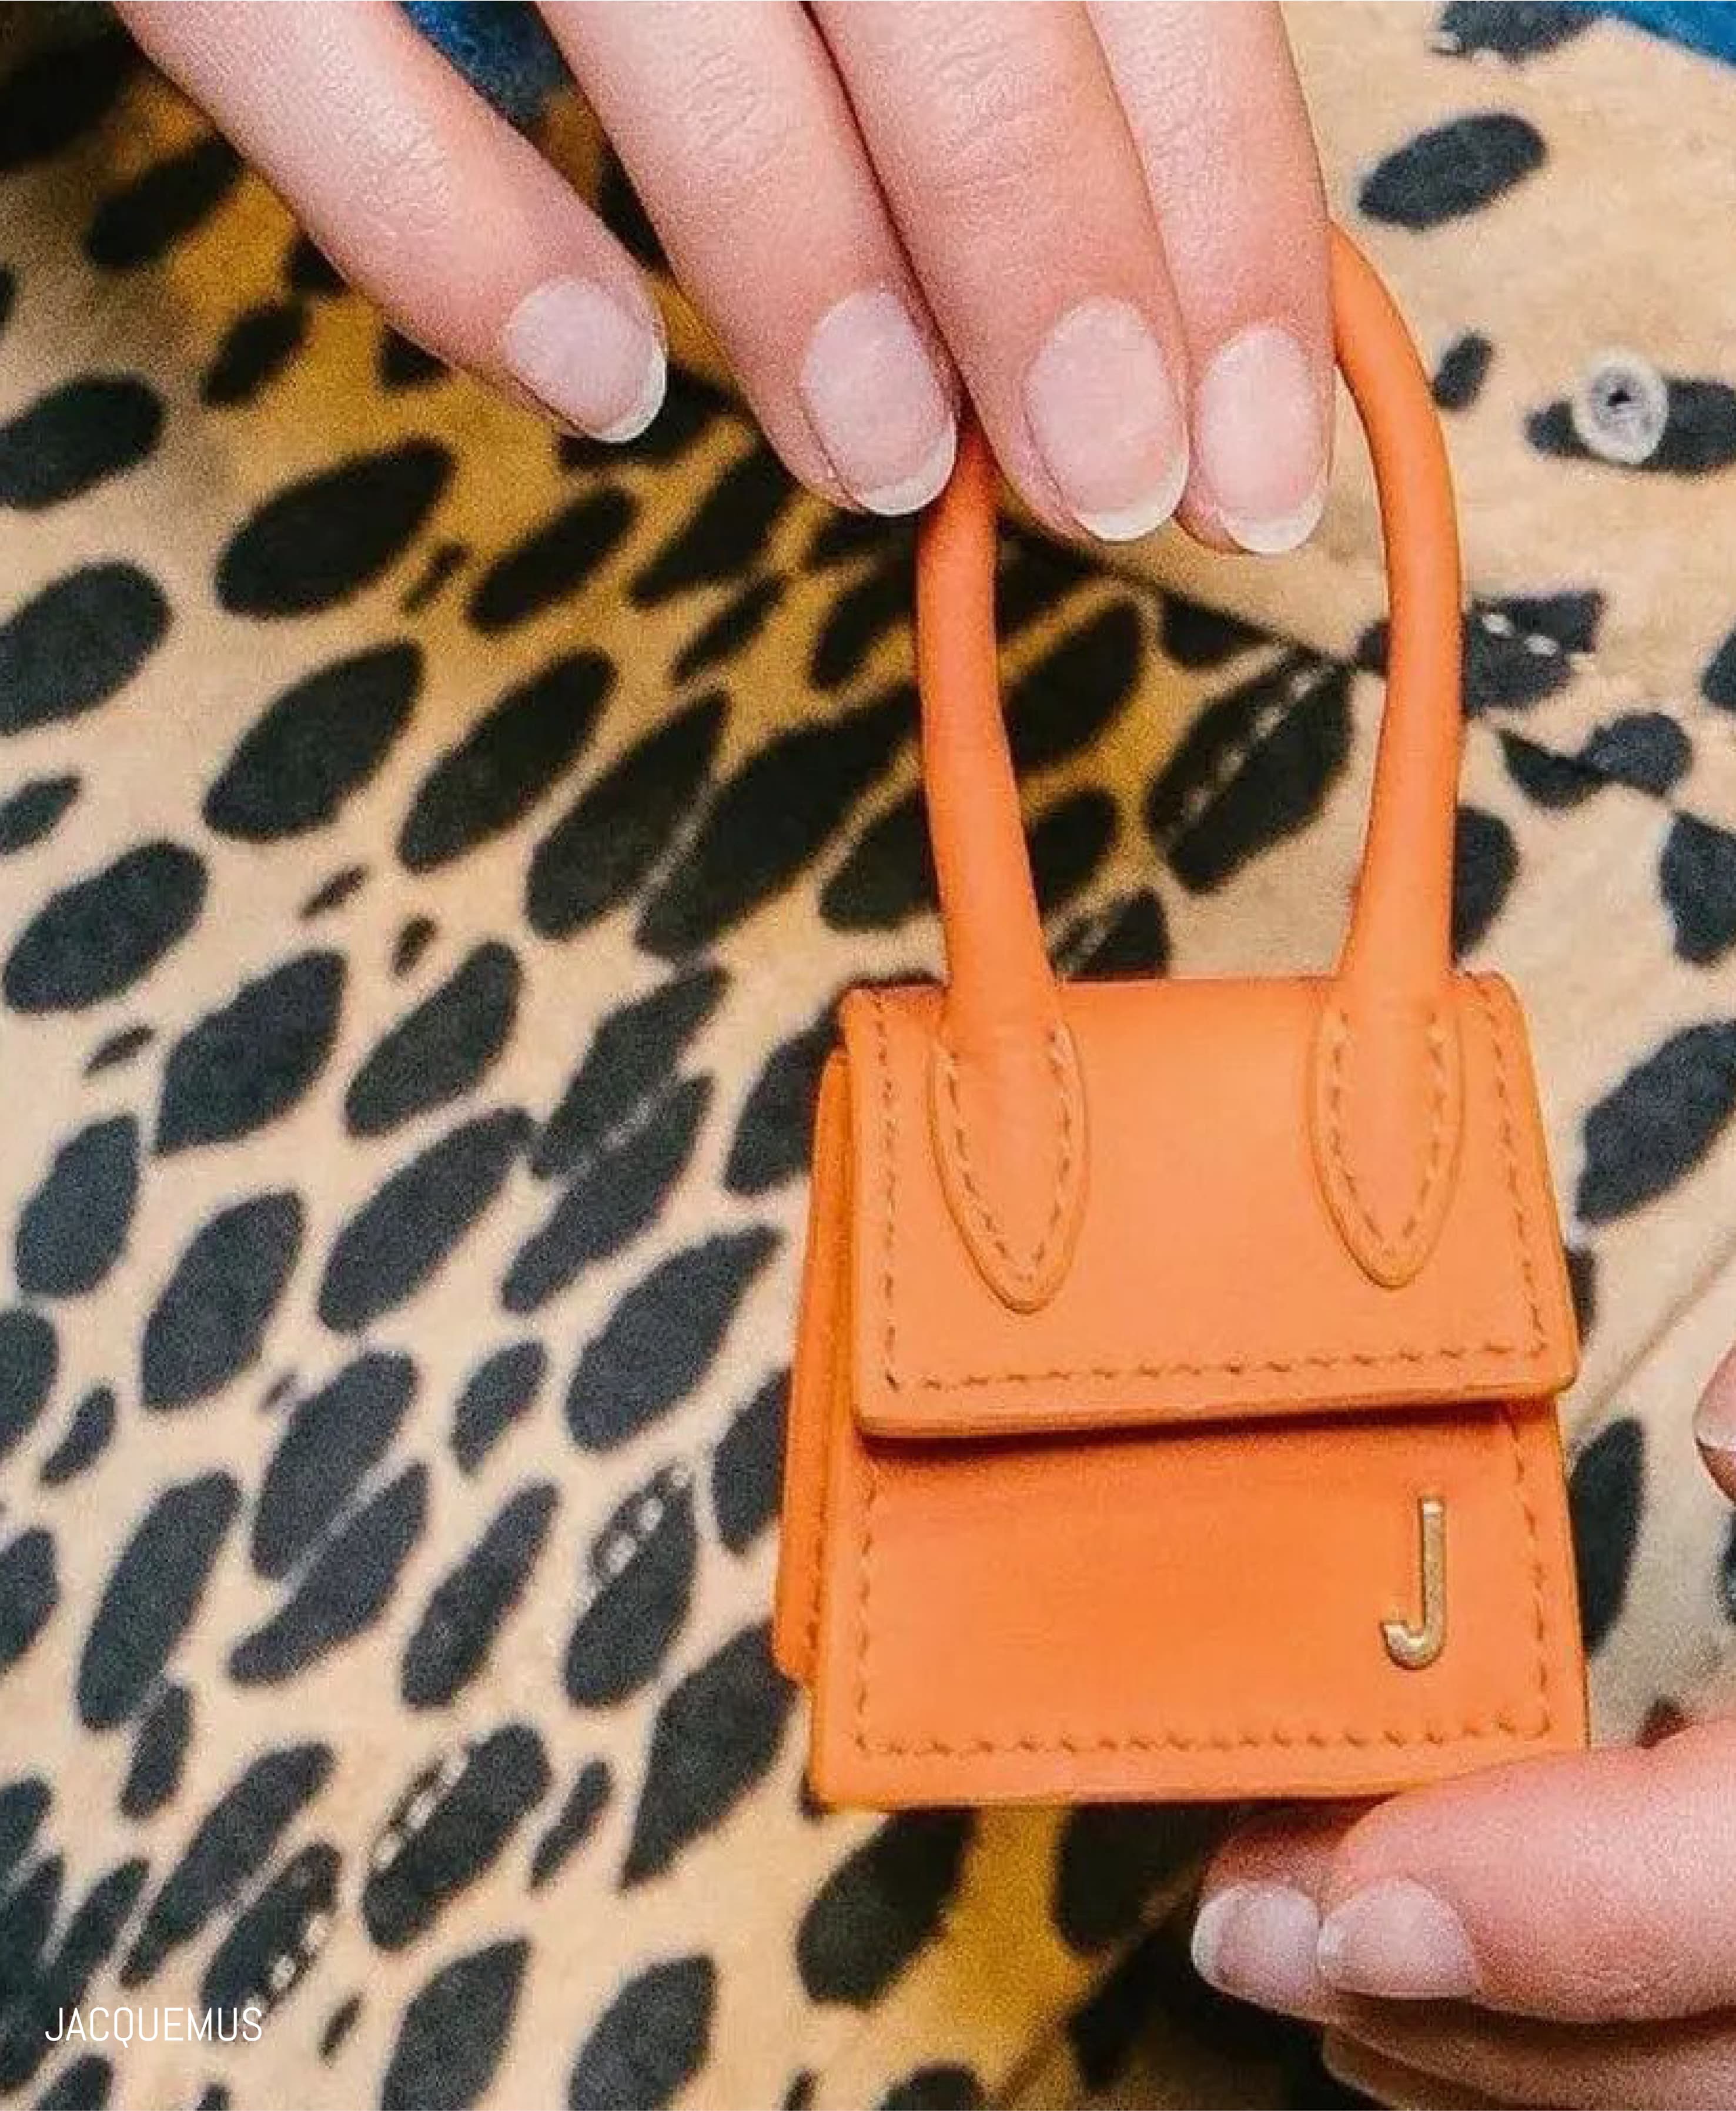 The Micro-Purse Is The Bag Trend That Won't Quit - How To Wear It Right